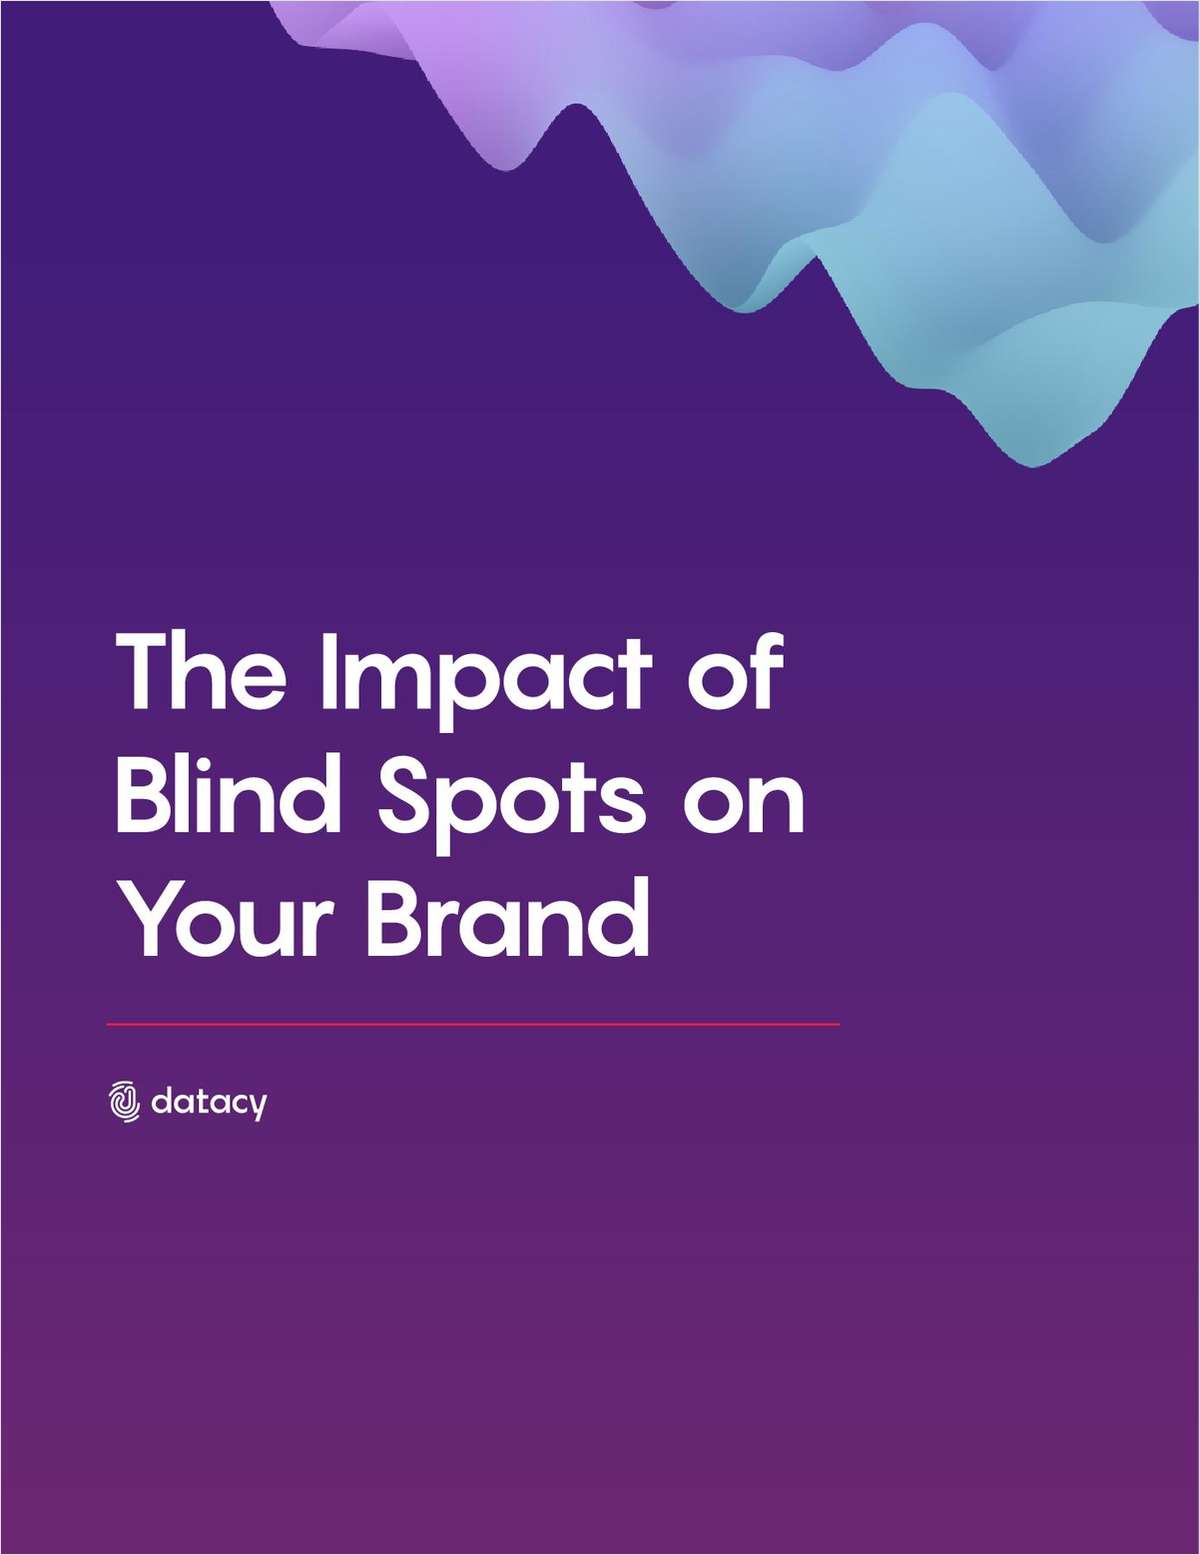 The Impact of Blind Spots on Your Brand